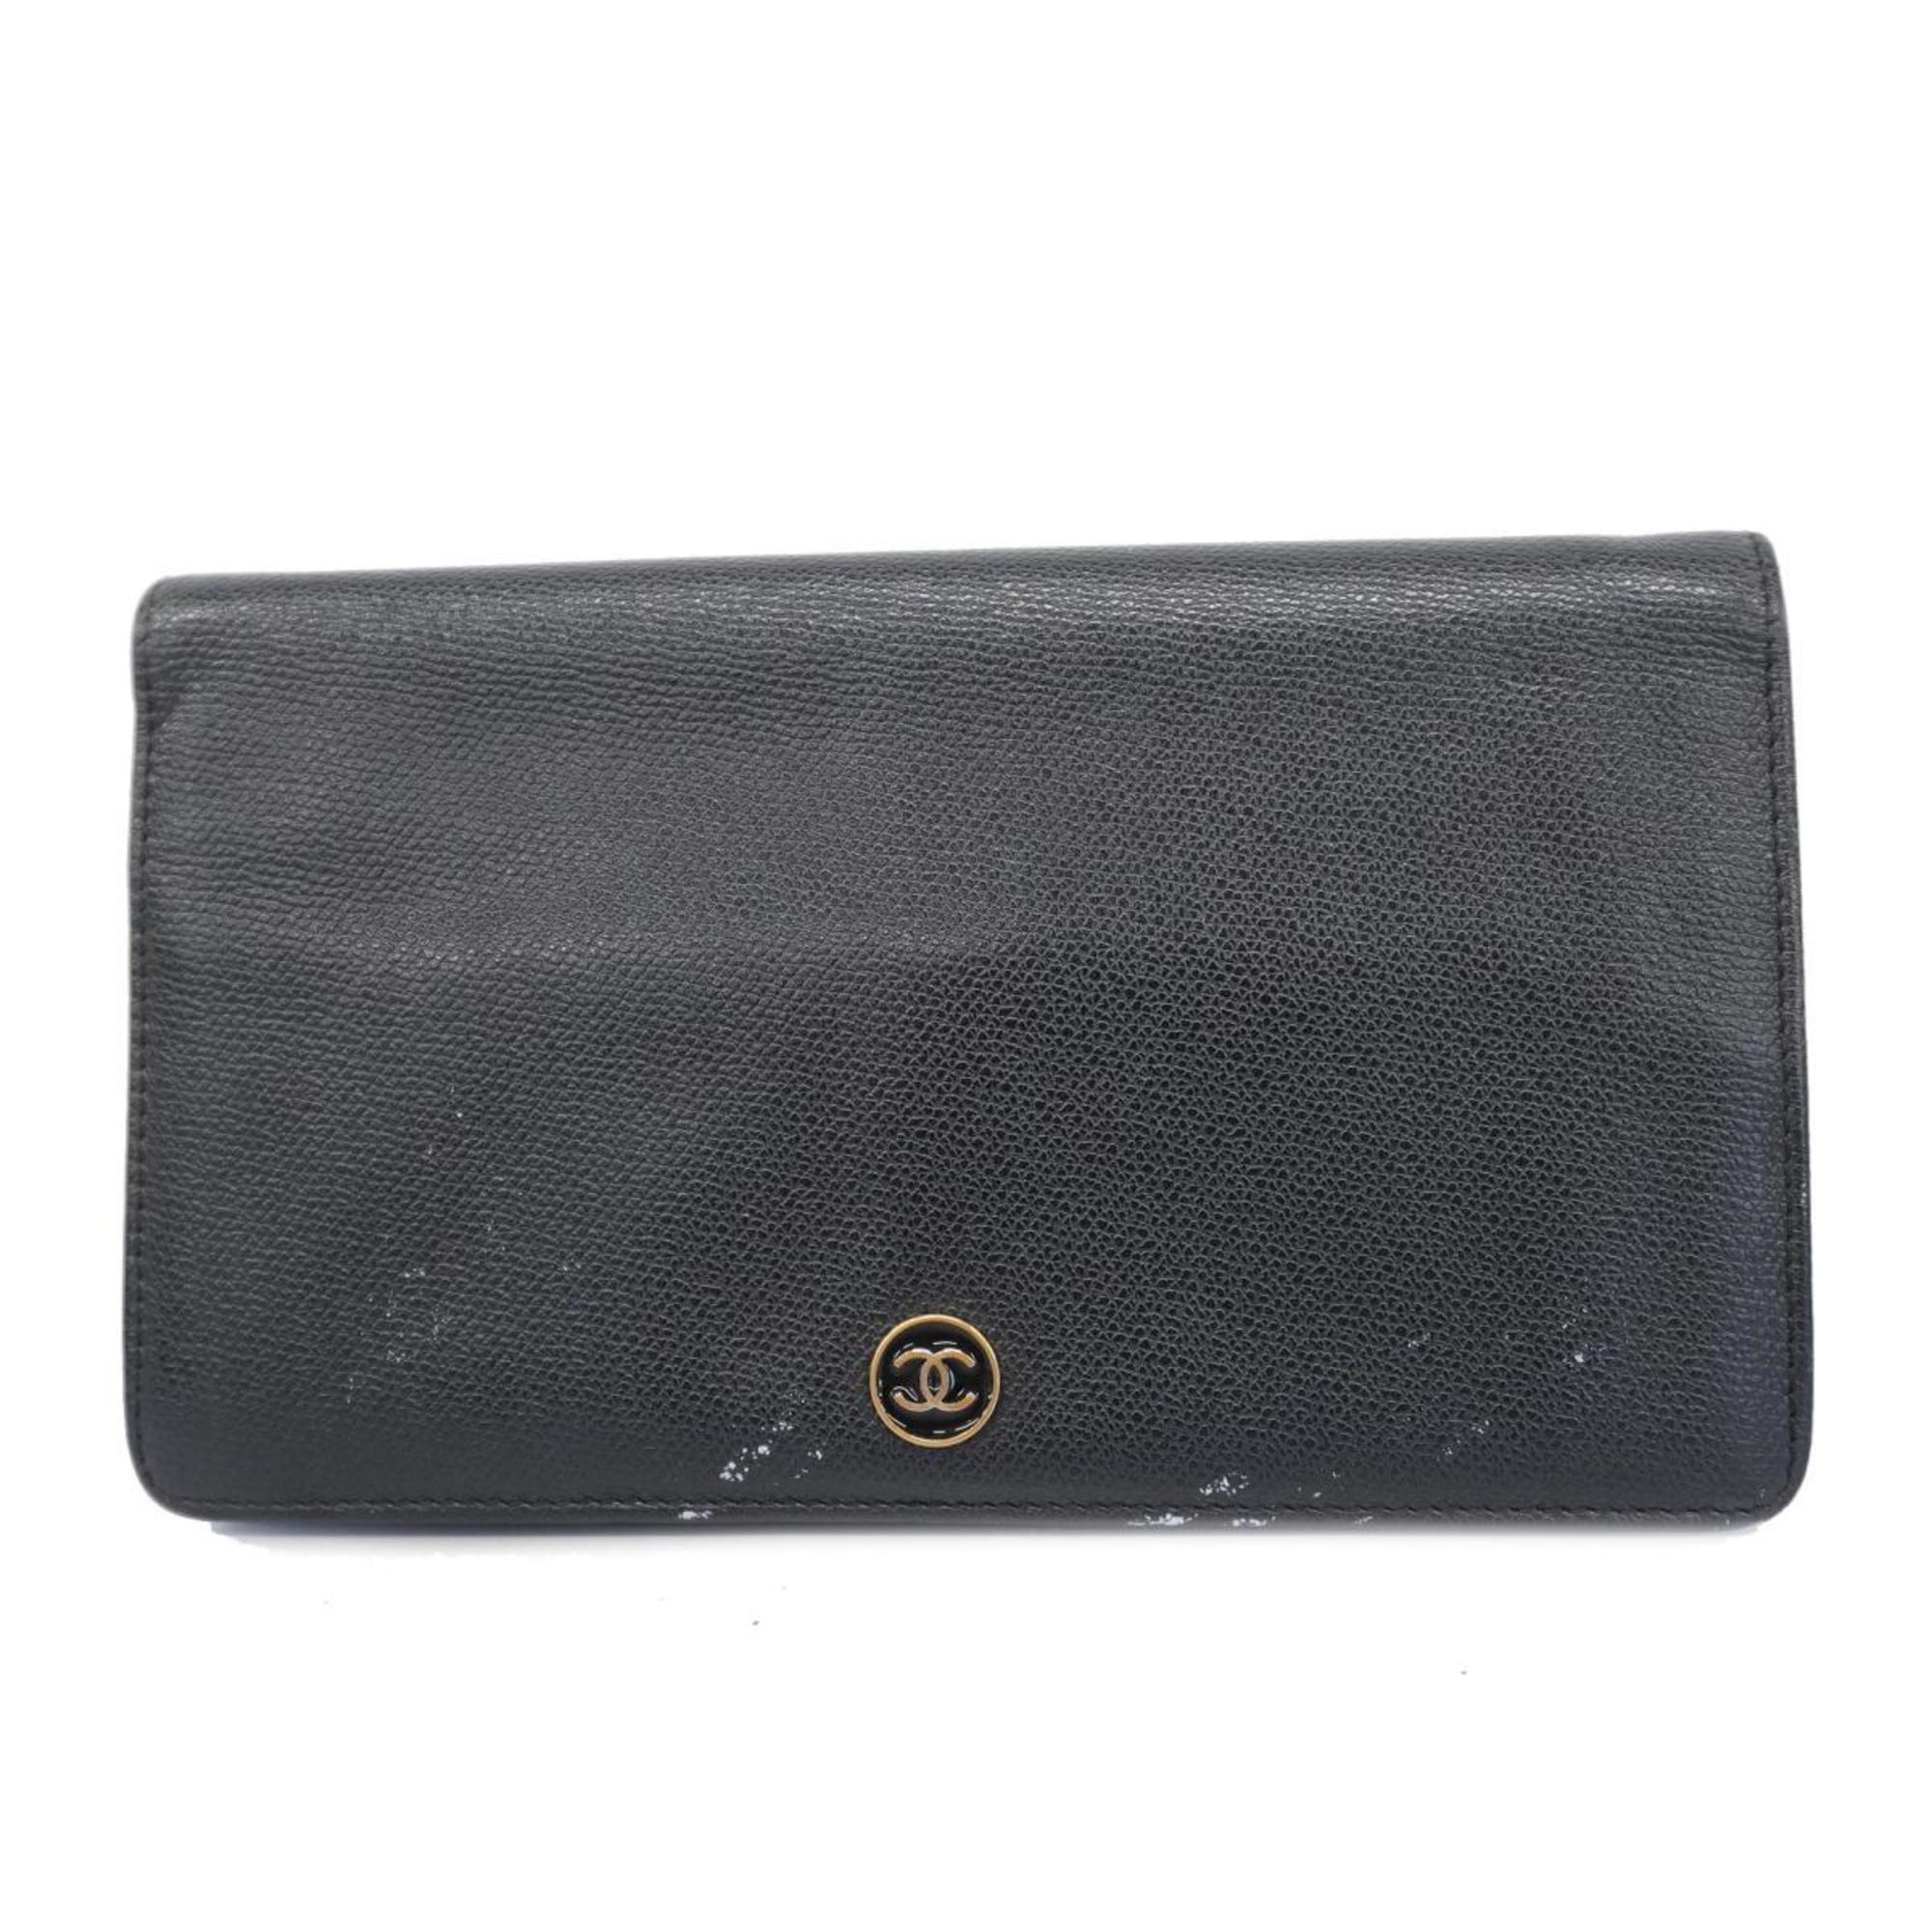 Chanel Long Wallet Coco Button Leather Black Women's